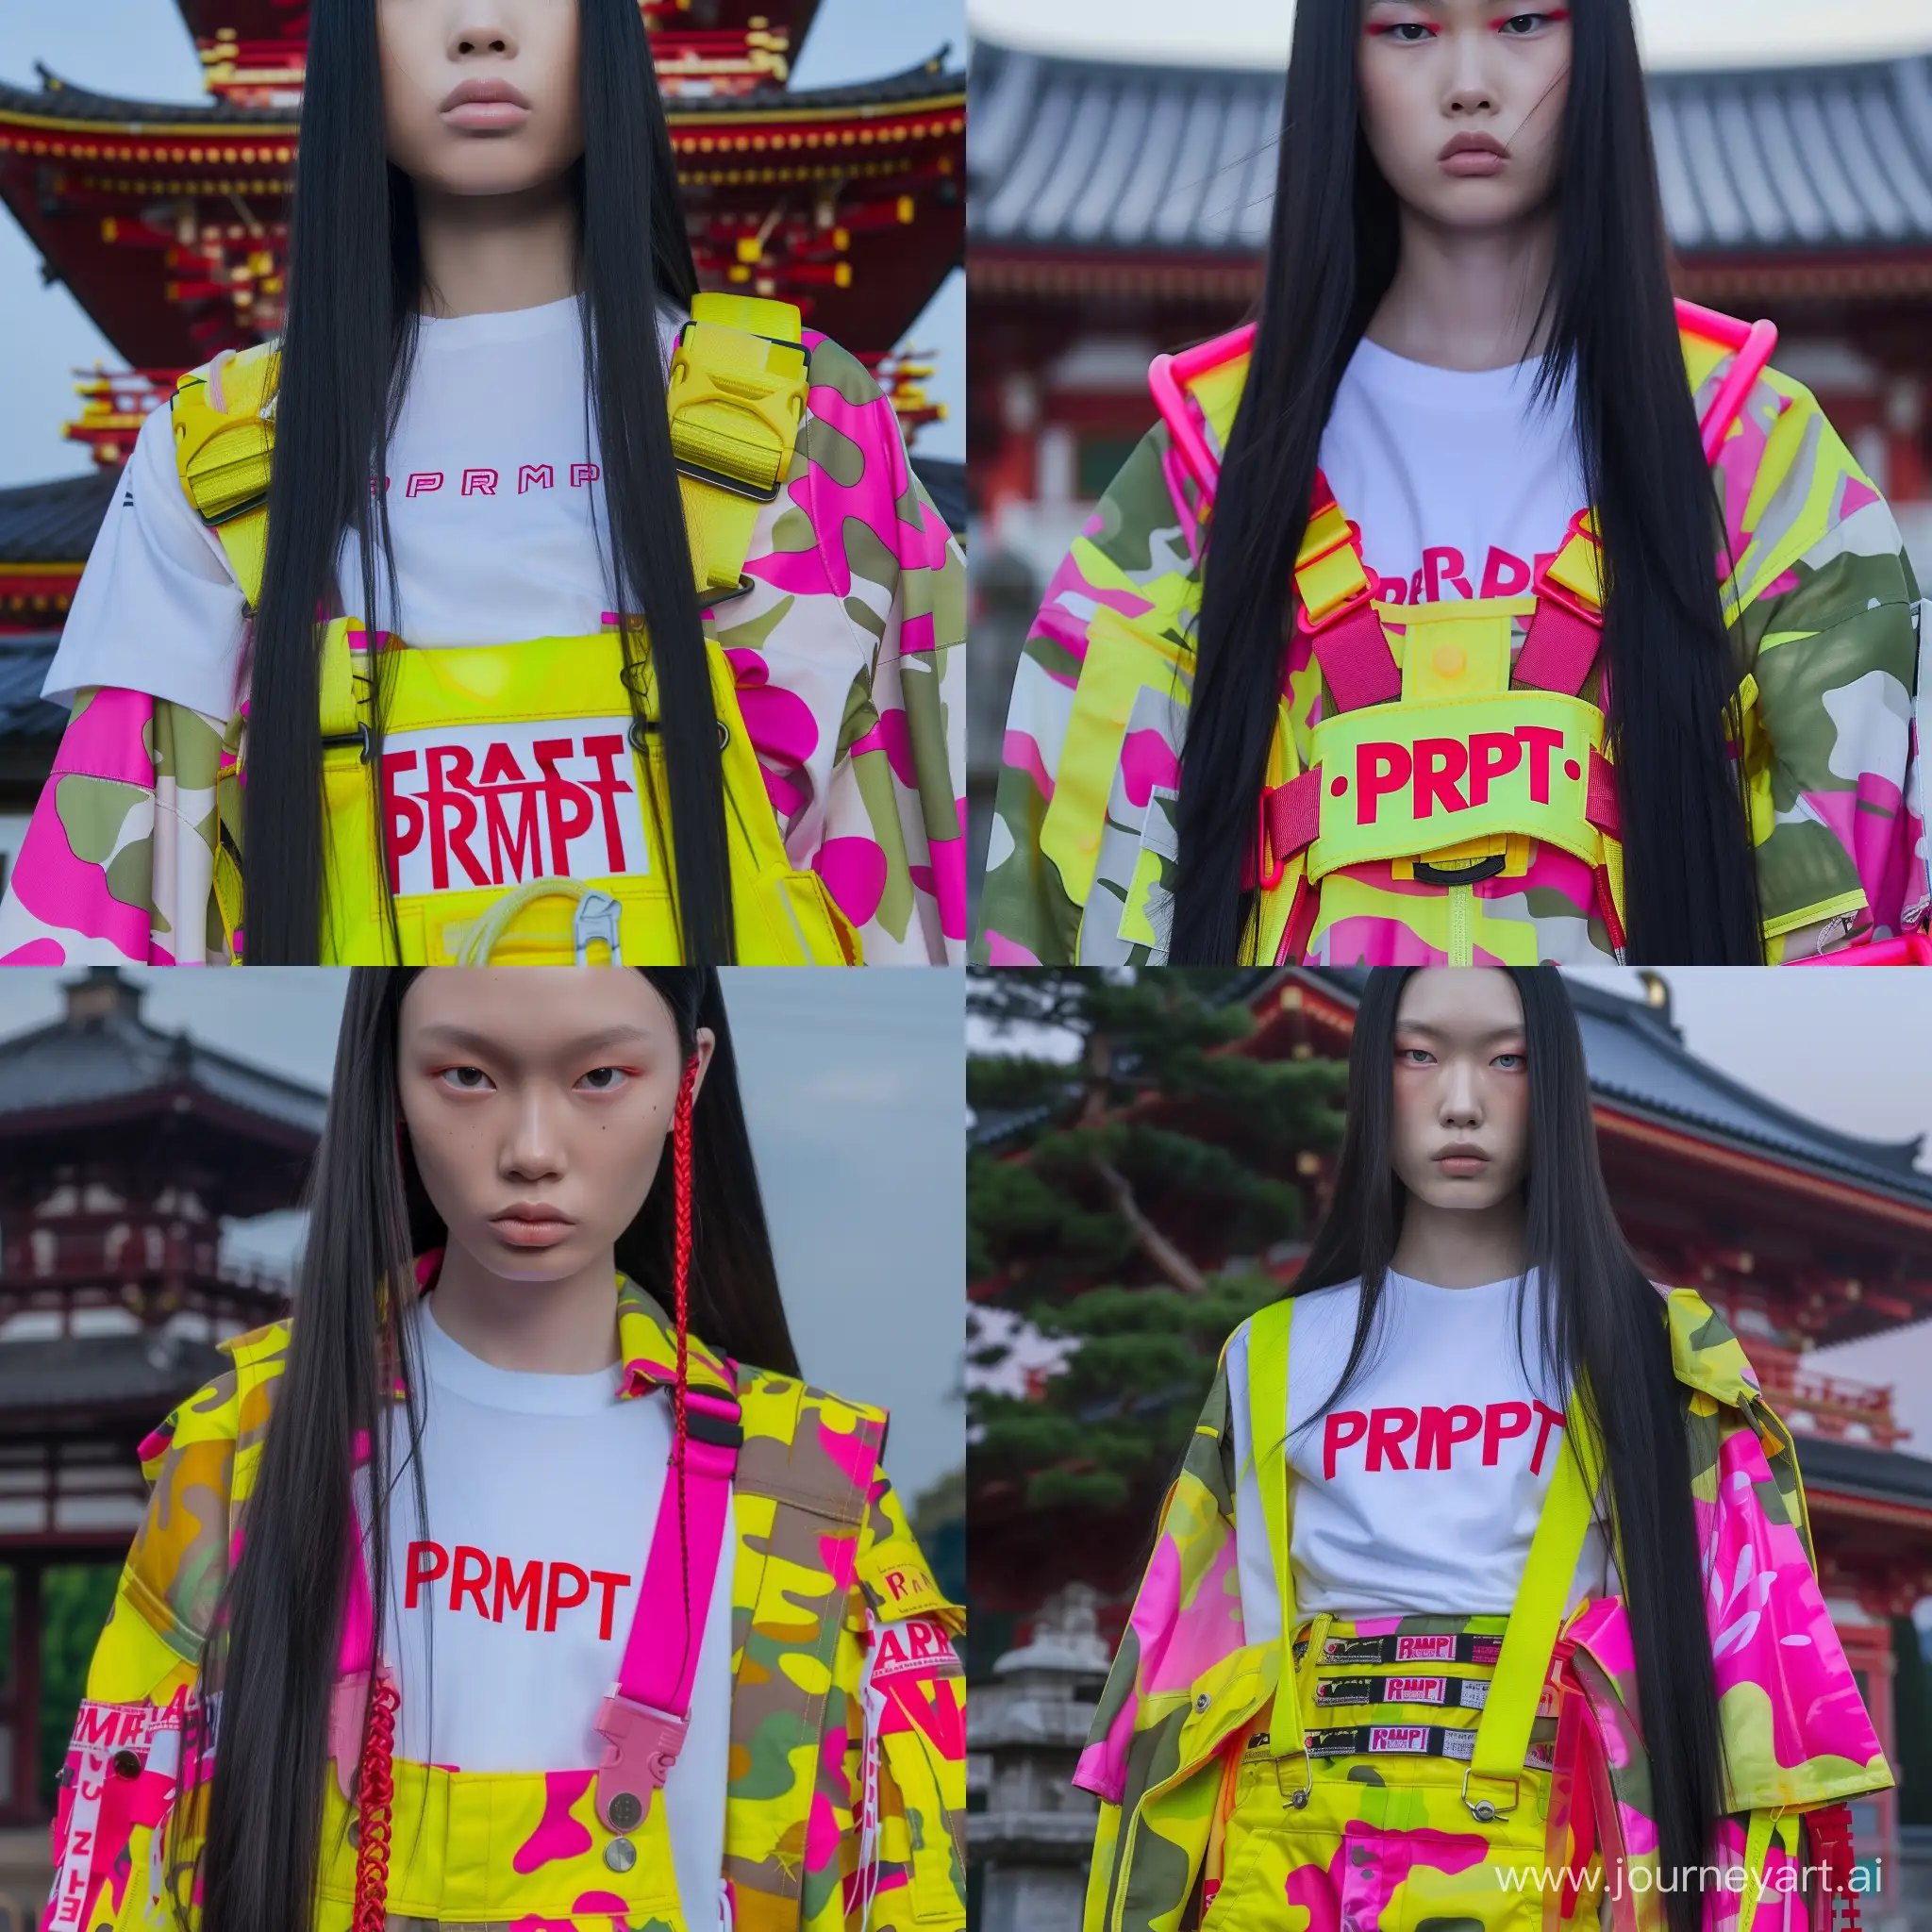 editorial fashion shot, asian ethnicity, long straight
black hair, intense gaze, pale complexion, neon, vibrant yellow and pink camo overalls and jacket, white tee with red "PRMPT" branding traditional Japanese temple backdrop, high contrast daylight, vivid and playful mood --sref https://cdn.discordapp.com/attachments/1187305629551972372/1205892489291235408/20240210_175645_1.png?ex=65da05e5&is=65c790e5&hm=b4911ef2cf178fe13c104d24d47254f4cfaab6e27786ebdd8642ac2b8807cc68& https://cdn.discordapp.com/attachments/1187305629551972372/1205892403123200022/20240210_175607_1.png?ex=65da05d1&is=65c790d1&hm=92d259374efd9290691c433981856ff8a19b8e193add522b032337f97bc72c75& --sw 1000 